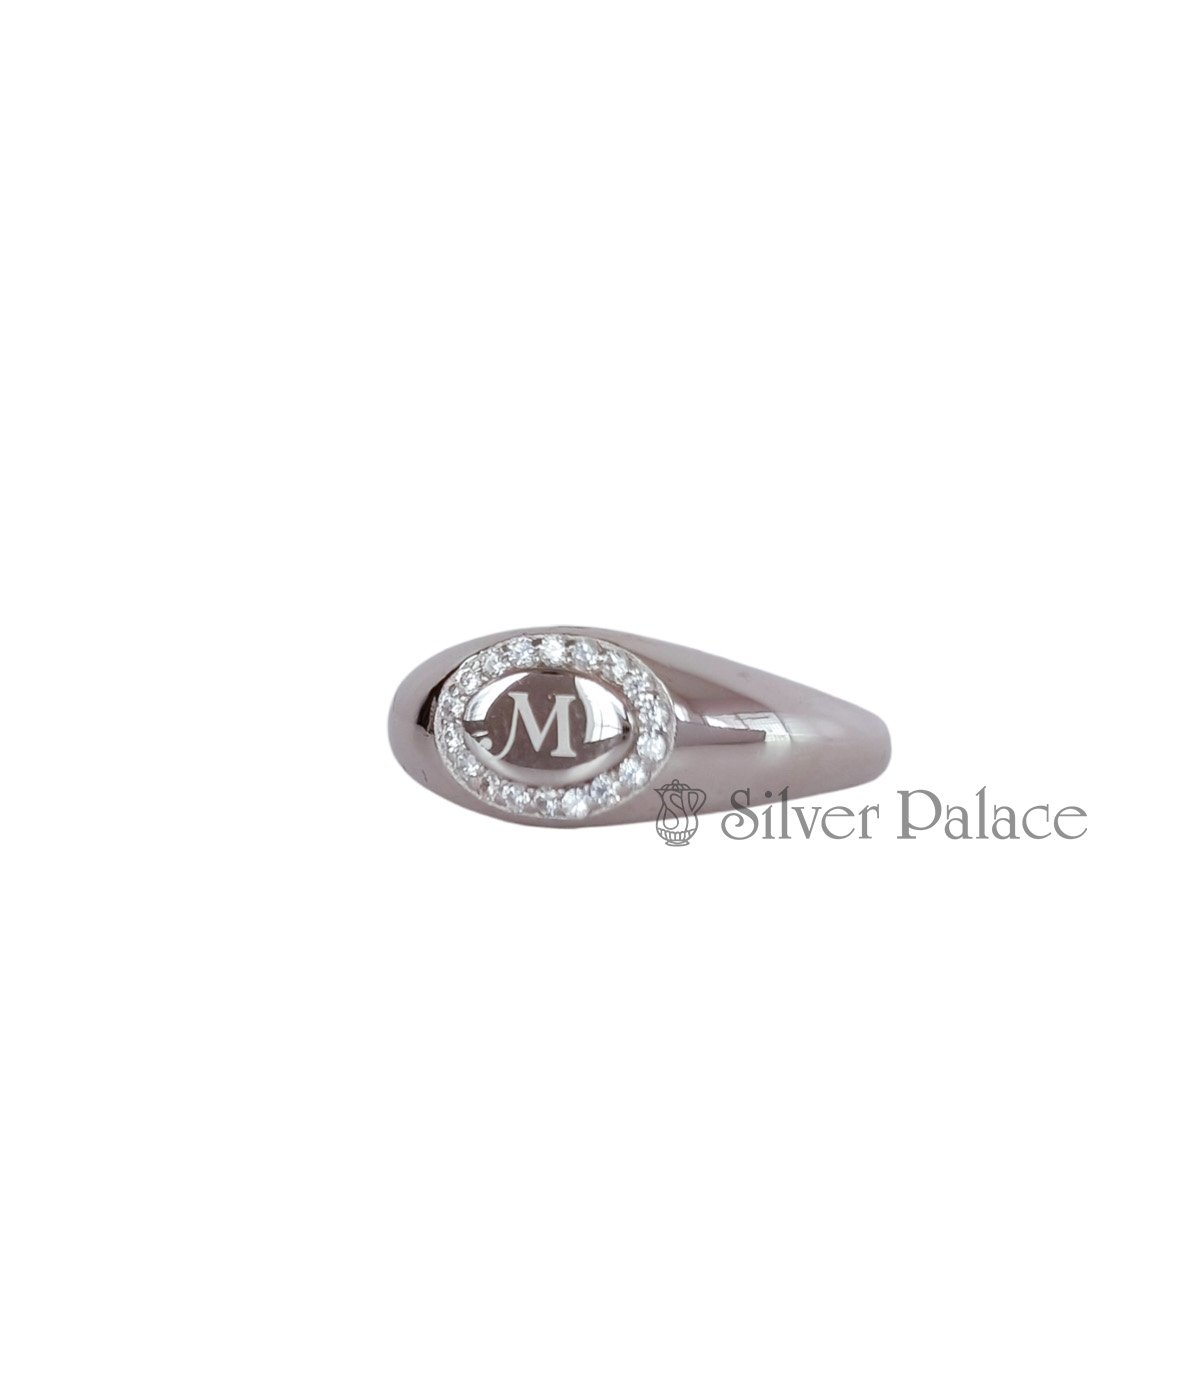 92.5 STERLING SILVER M LETTER STONE RING FOR GIRLS